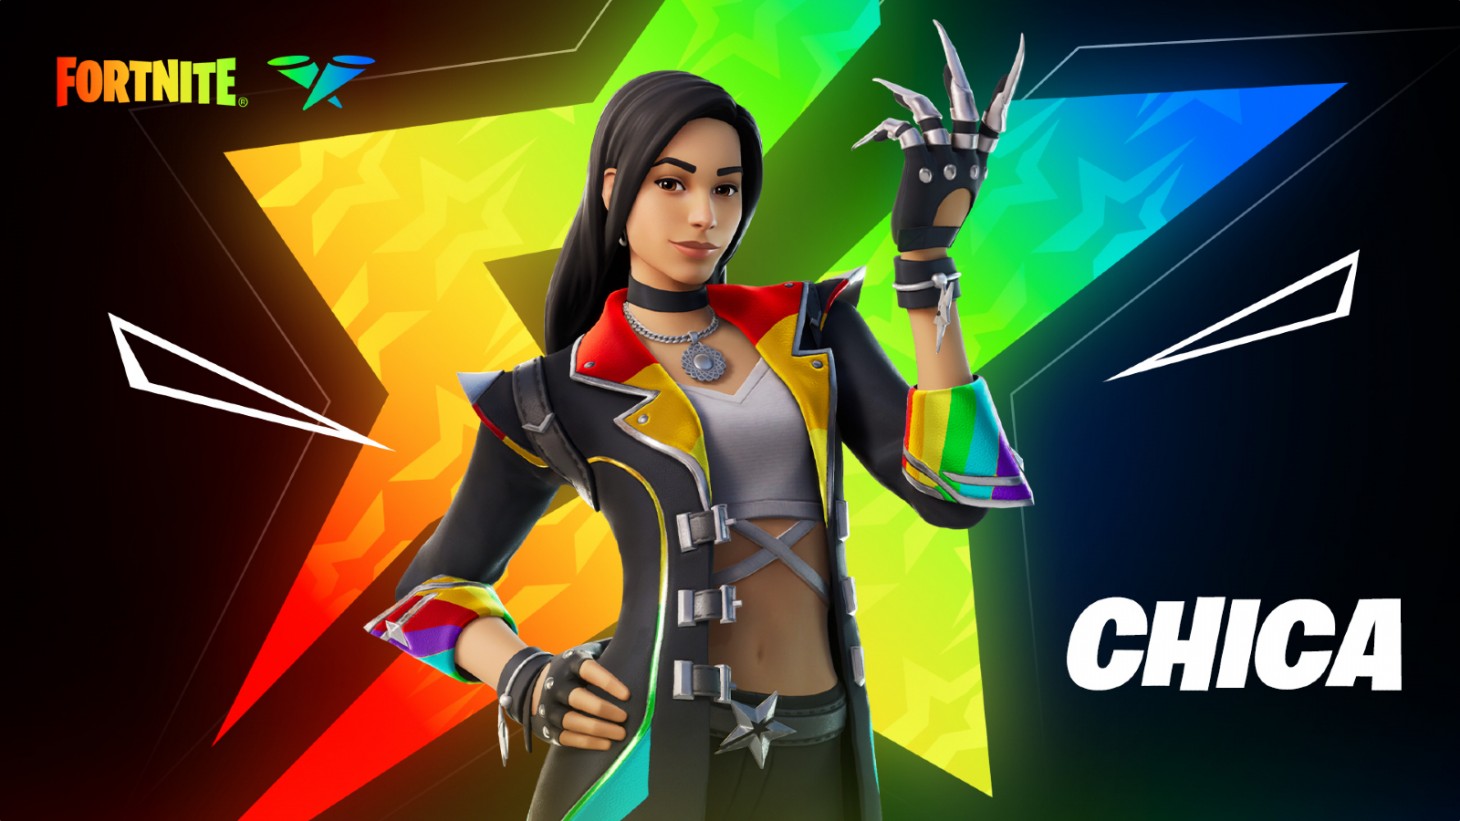 Maria ‘Chica’ Lopez Joins The Fortnite Icon Series With New In-Game Items This Weekend